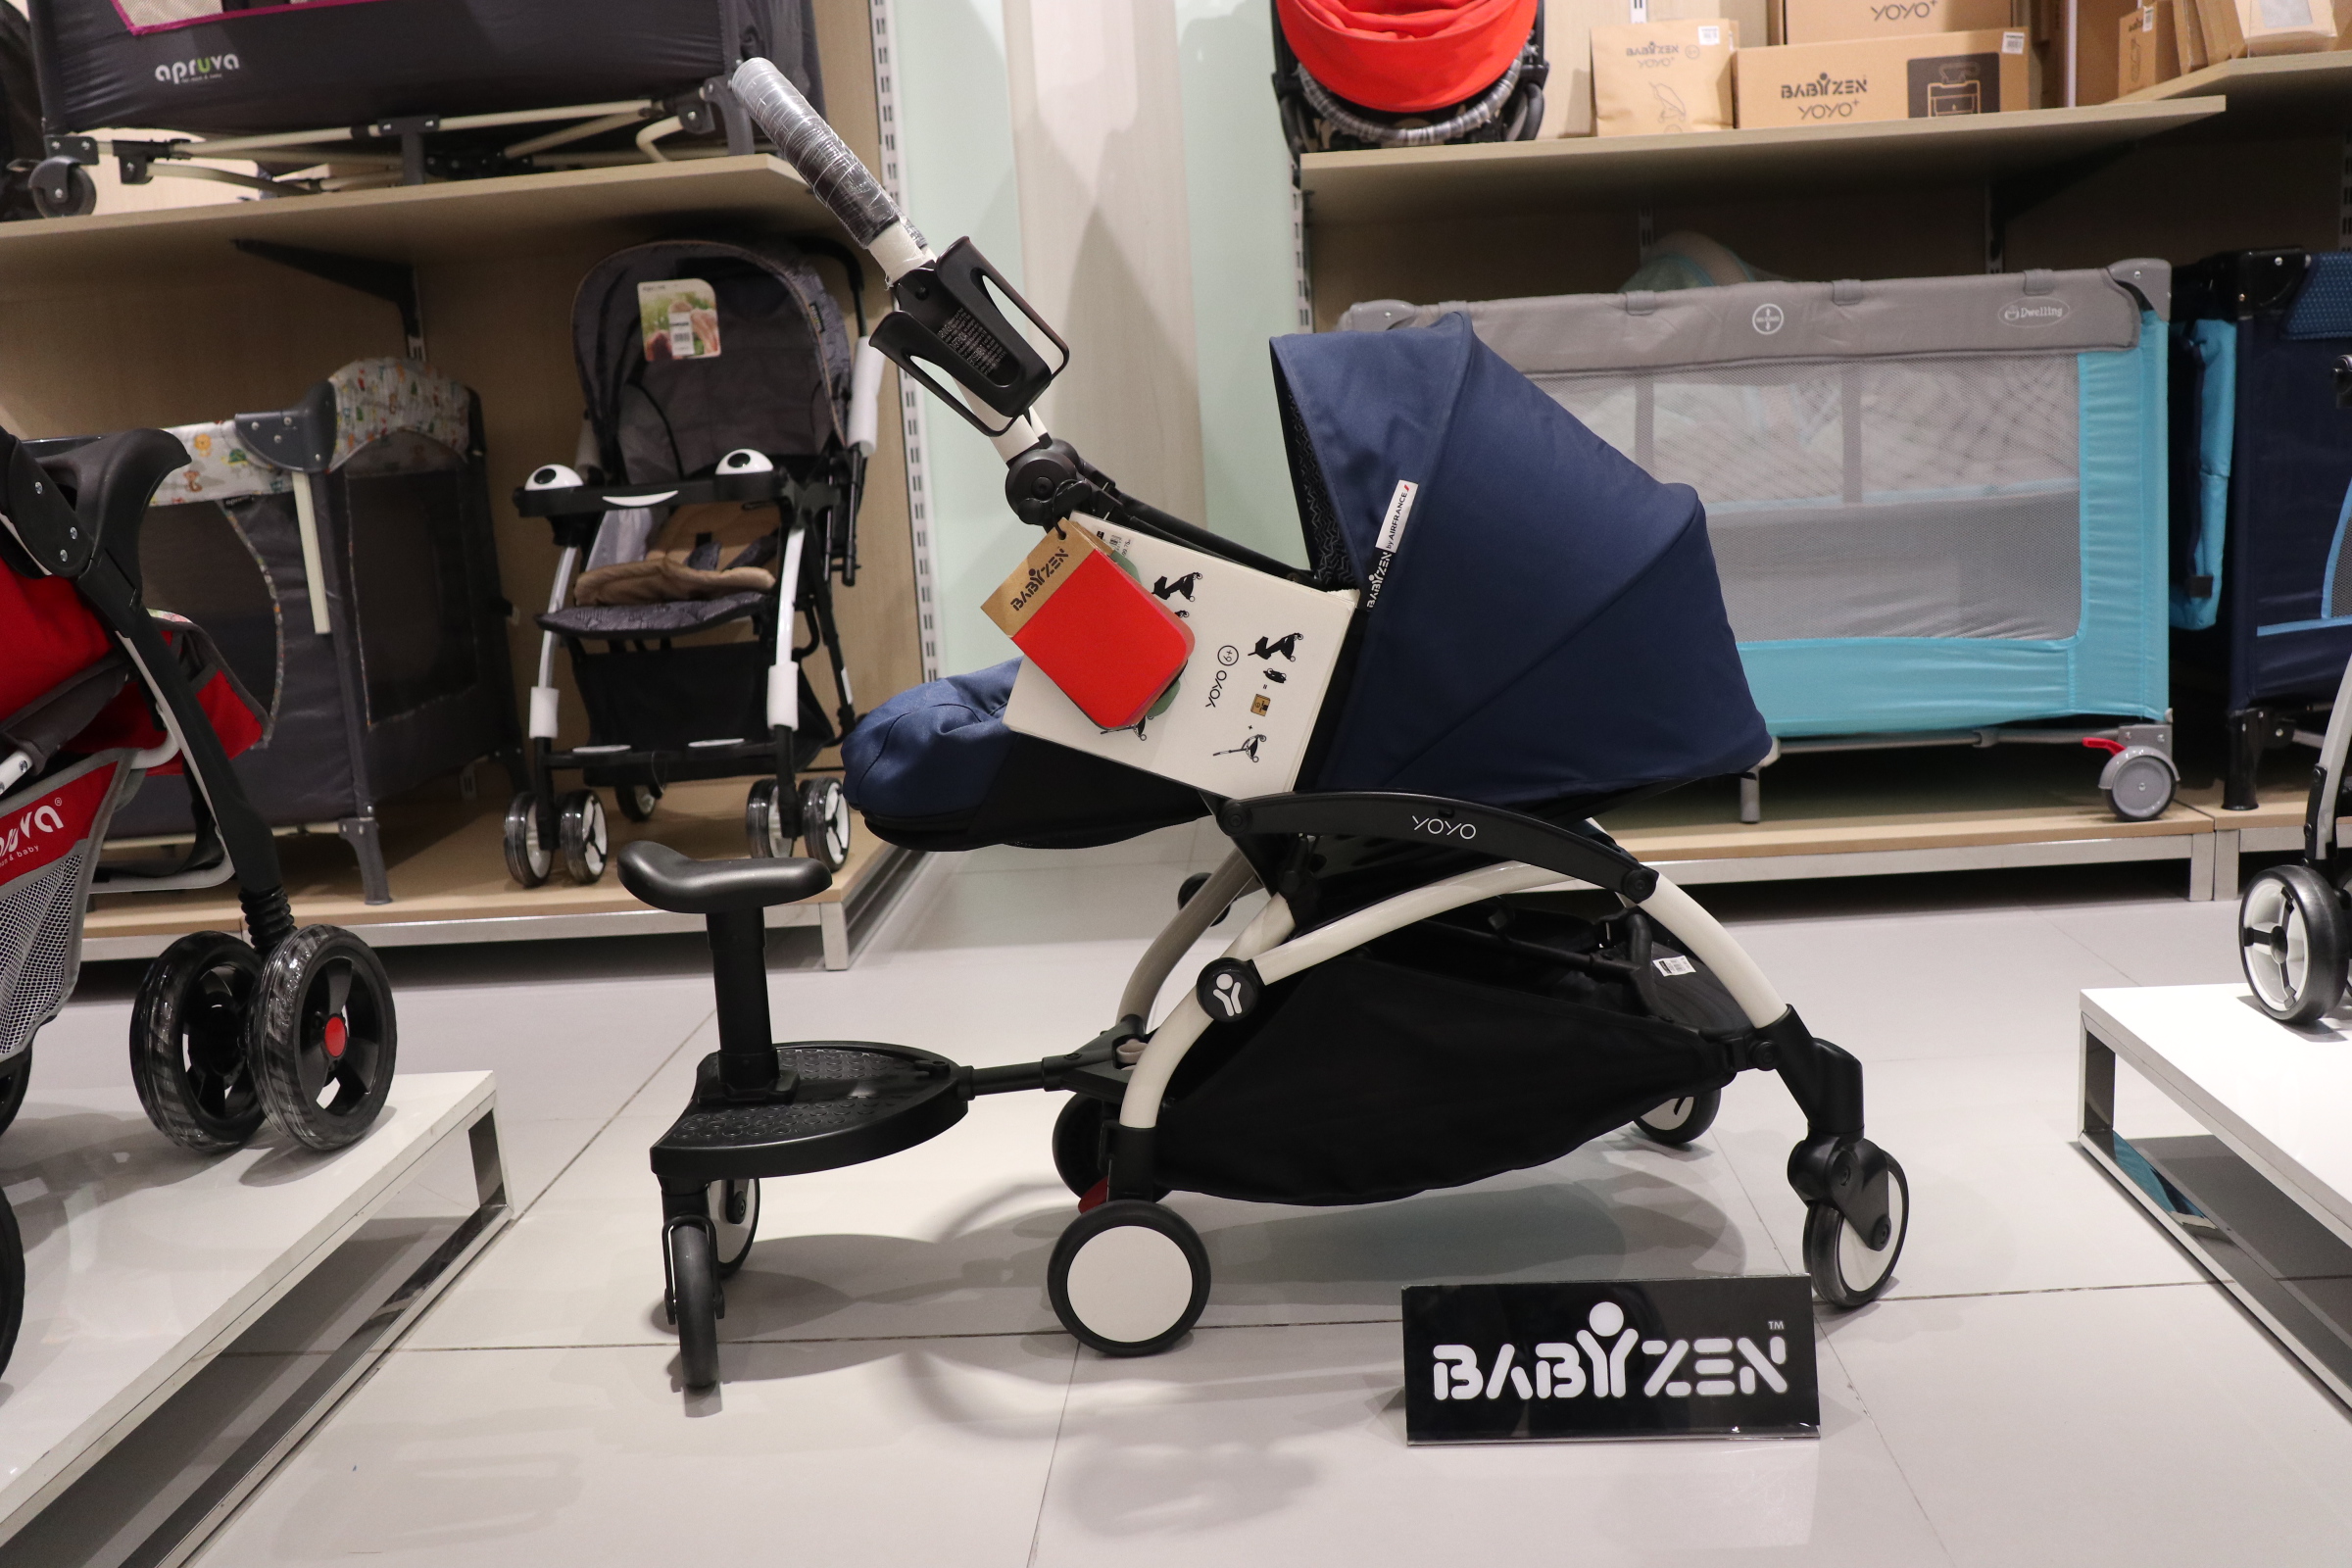 baby 1st stroller sm department store